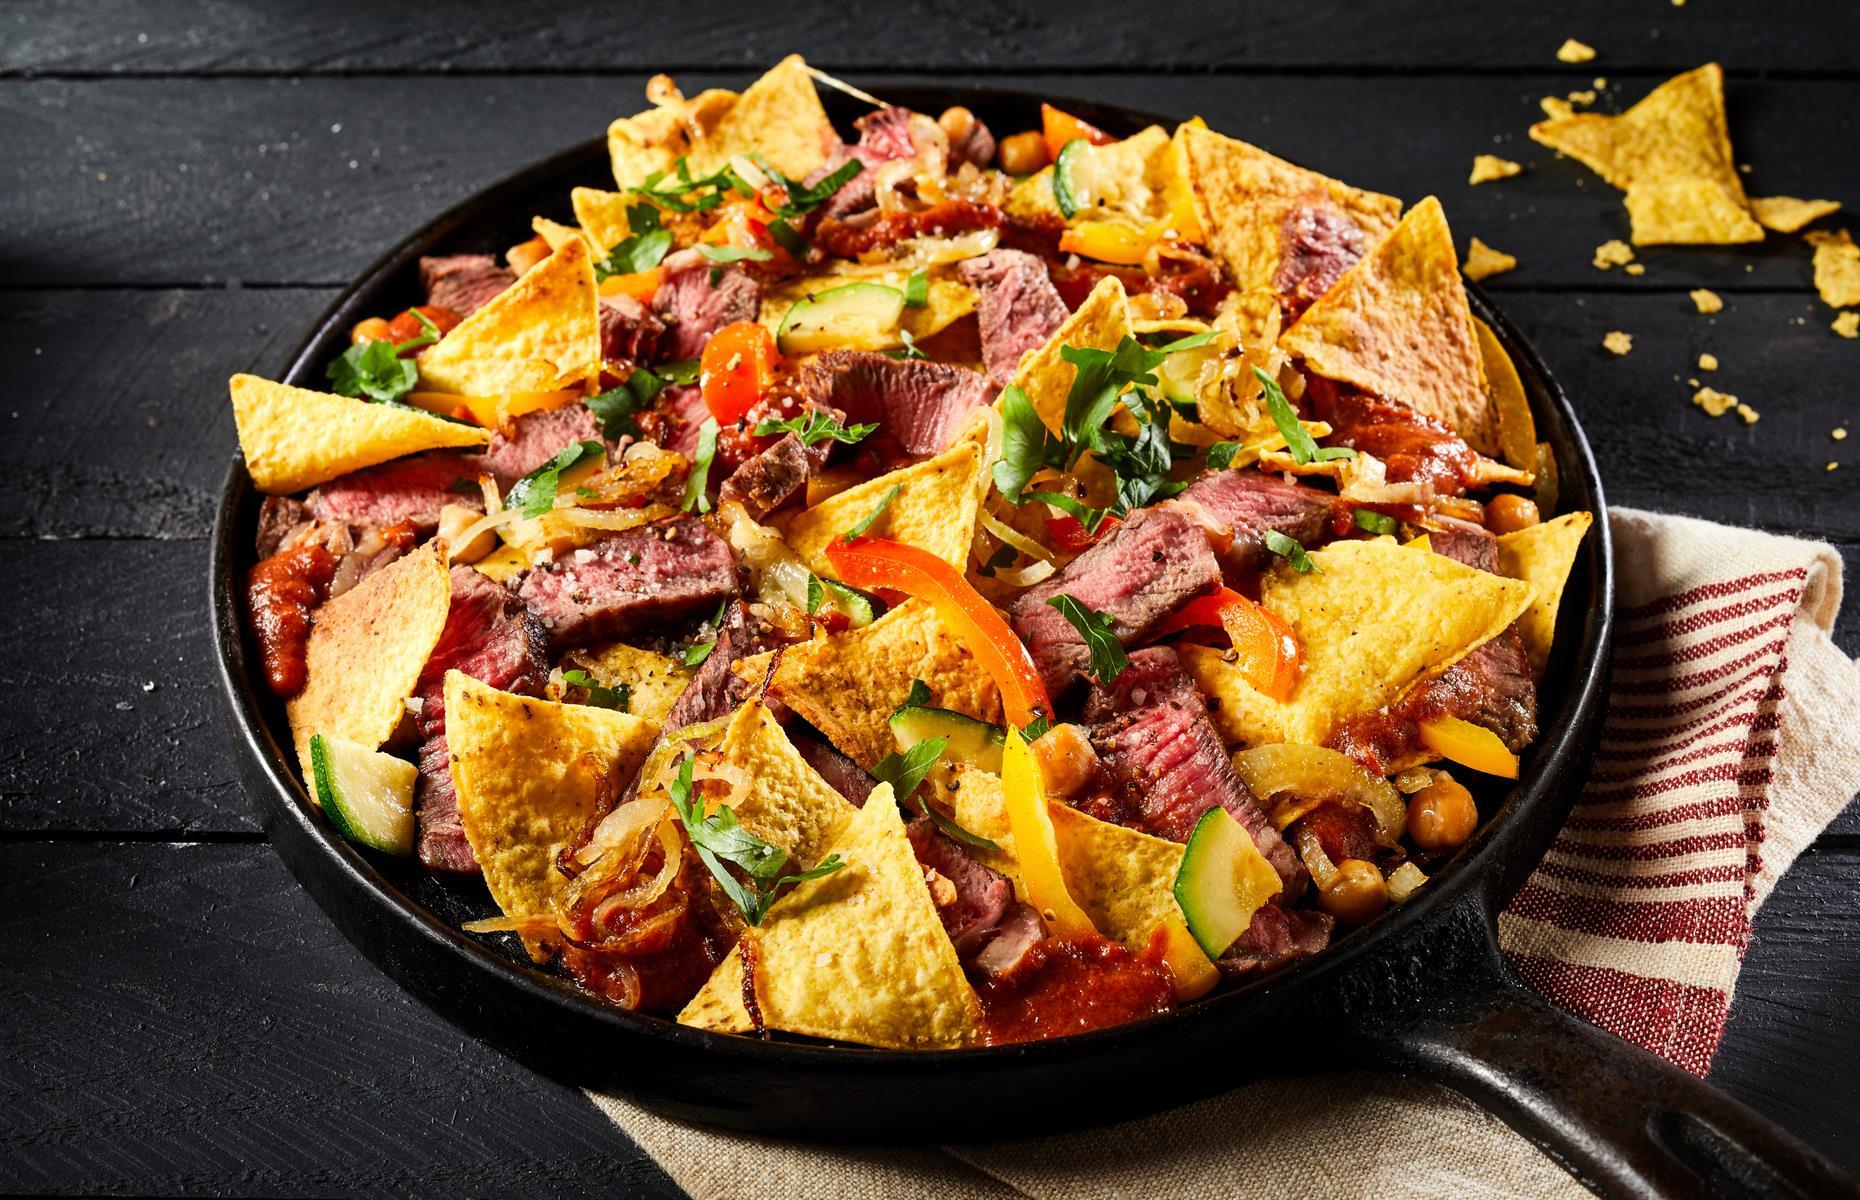 Upgrade your nachos with these tasty topping ideas